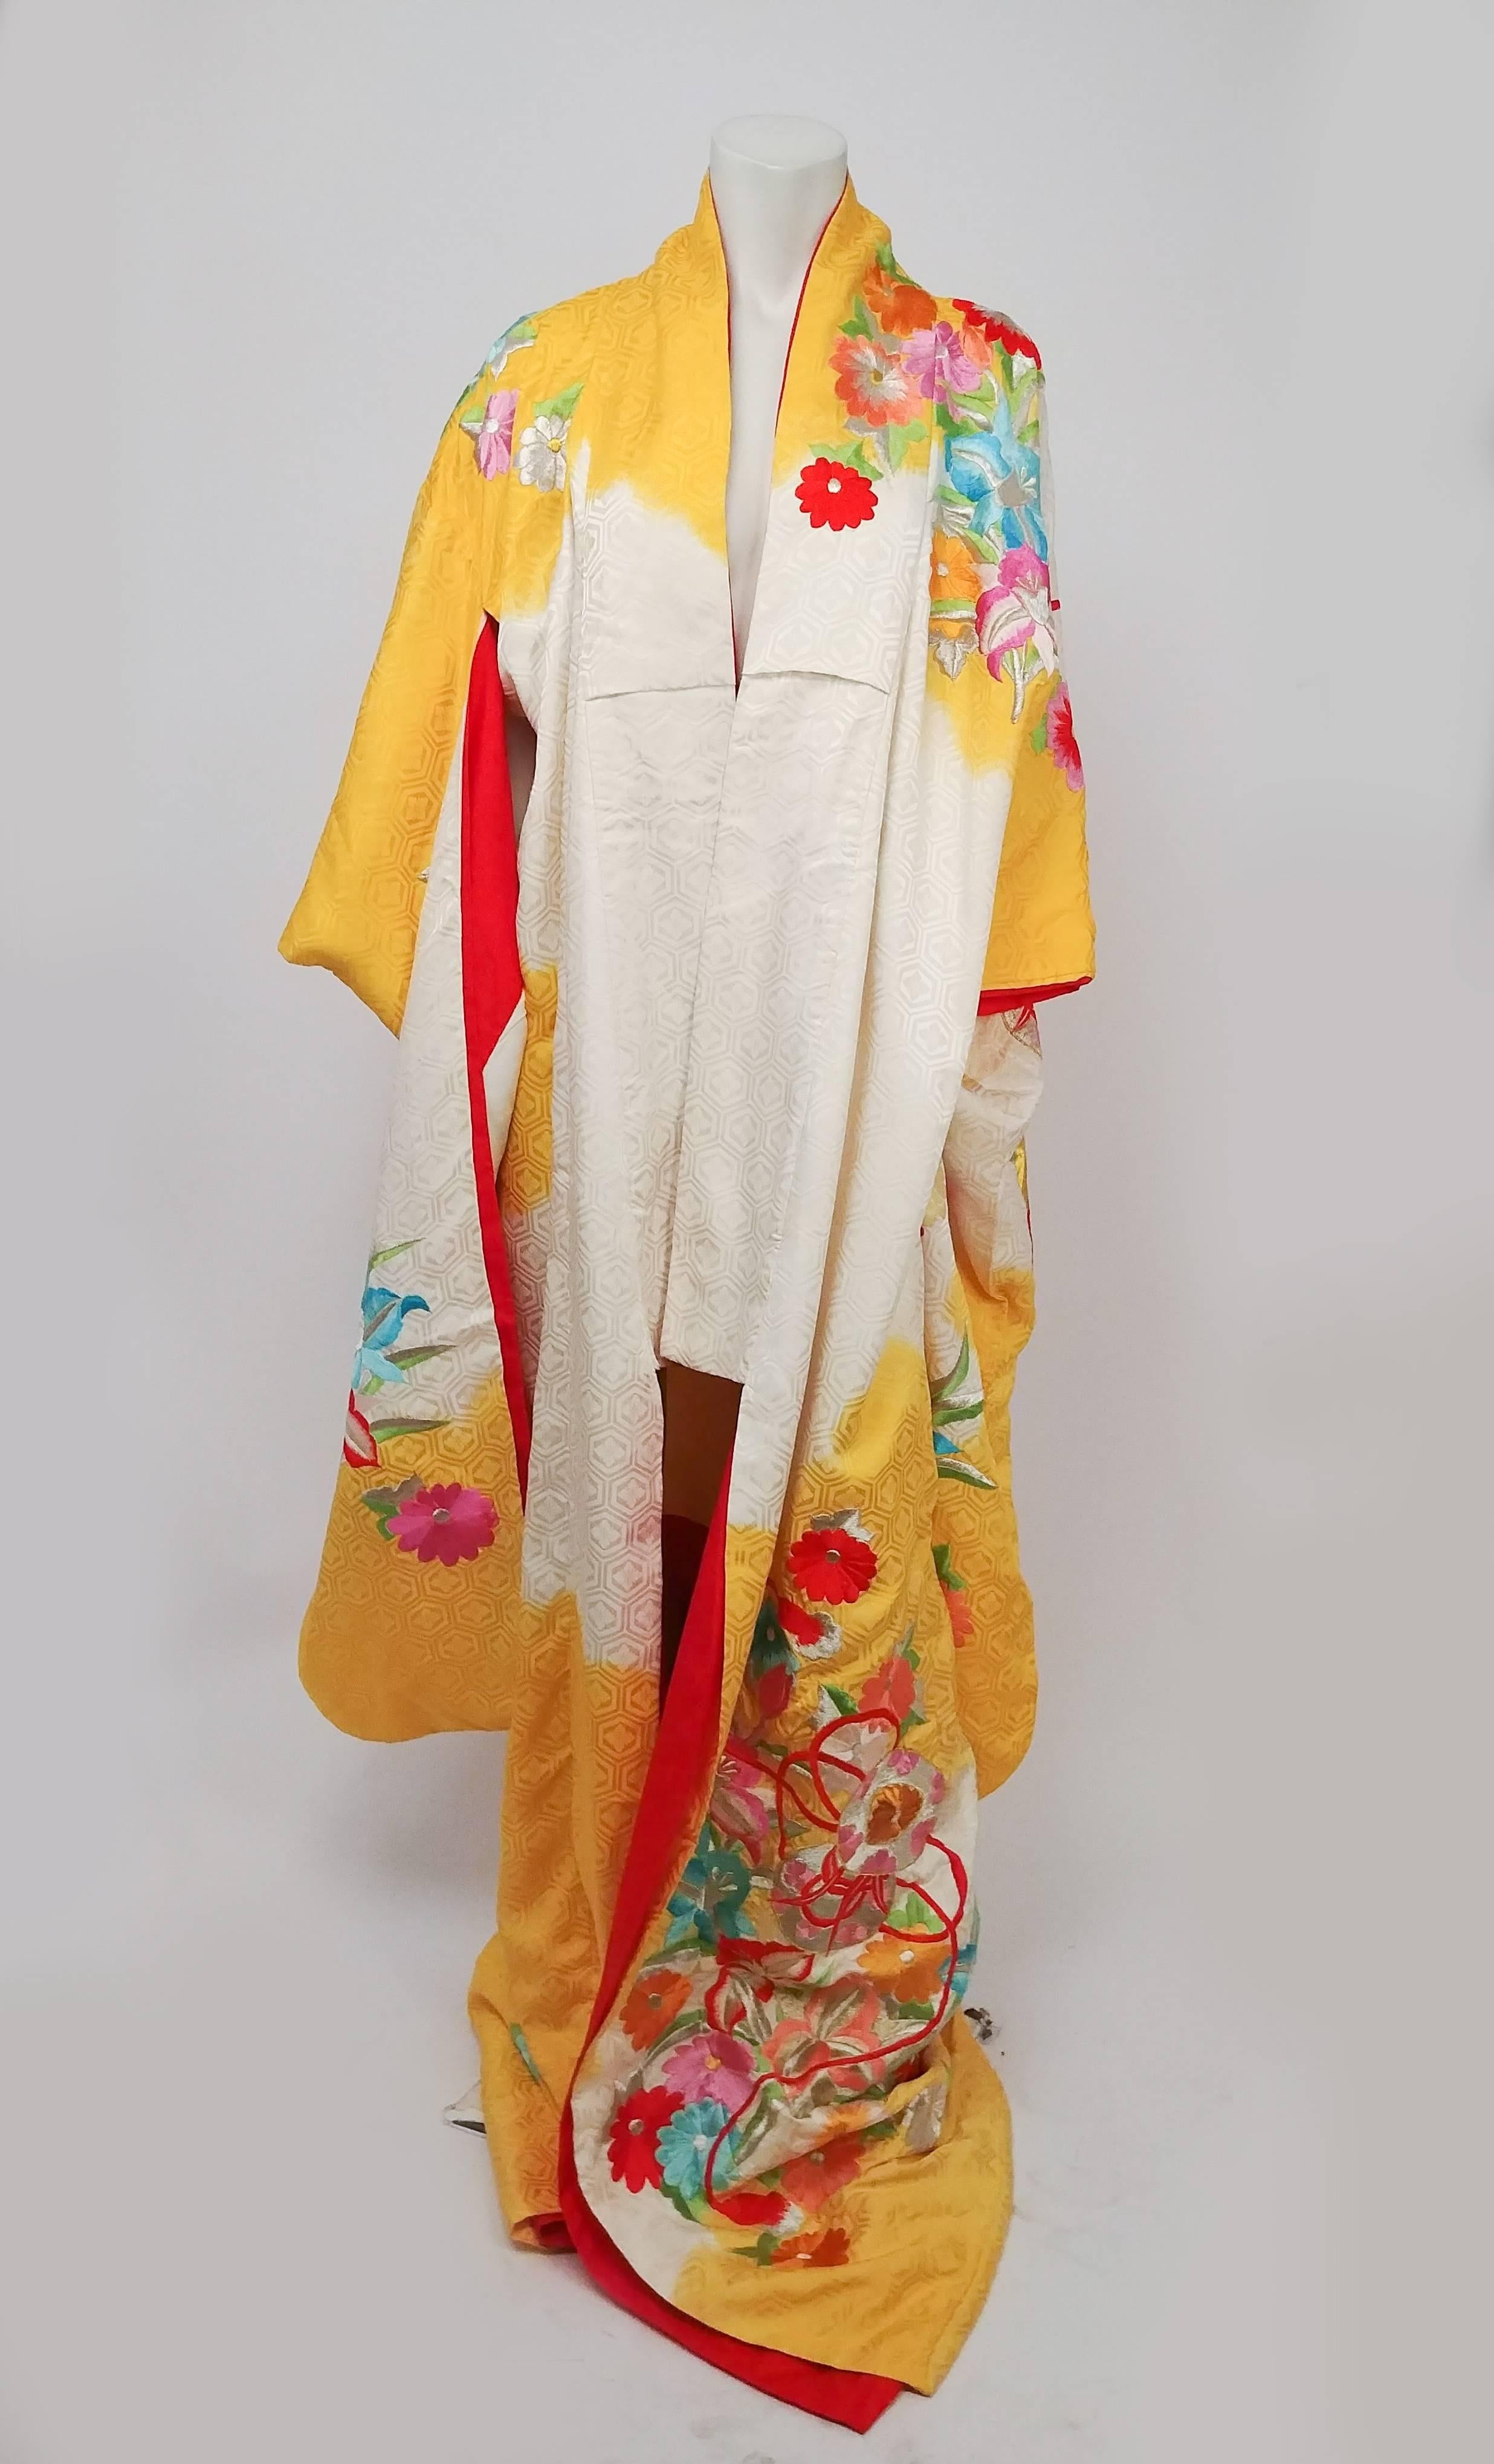 Flowers & Temari Yellow Silk Jacquard Kimono with Colorful Embroidery. Yellow and cream dyed silk jacquard with a hexagonal pattern with woven flowers. Embroidered all over with flowers, ribbon, and temari balls. Lining in red silk that shows at